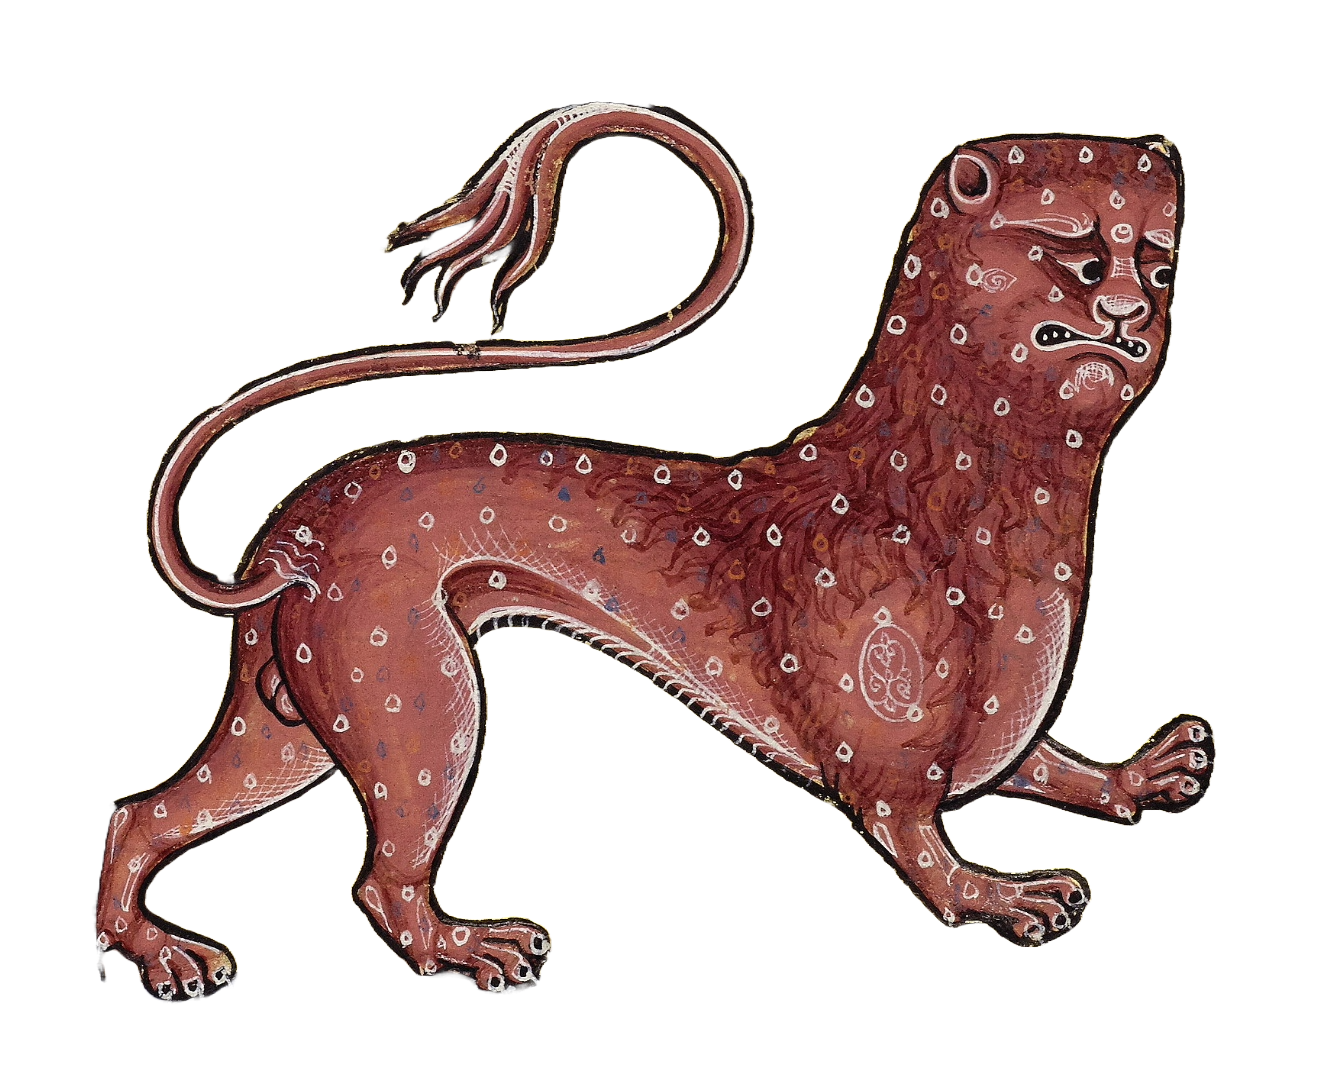 Medieval illumination of a red lion with white spots